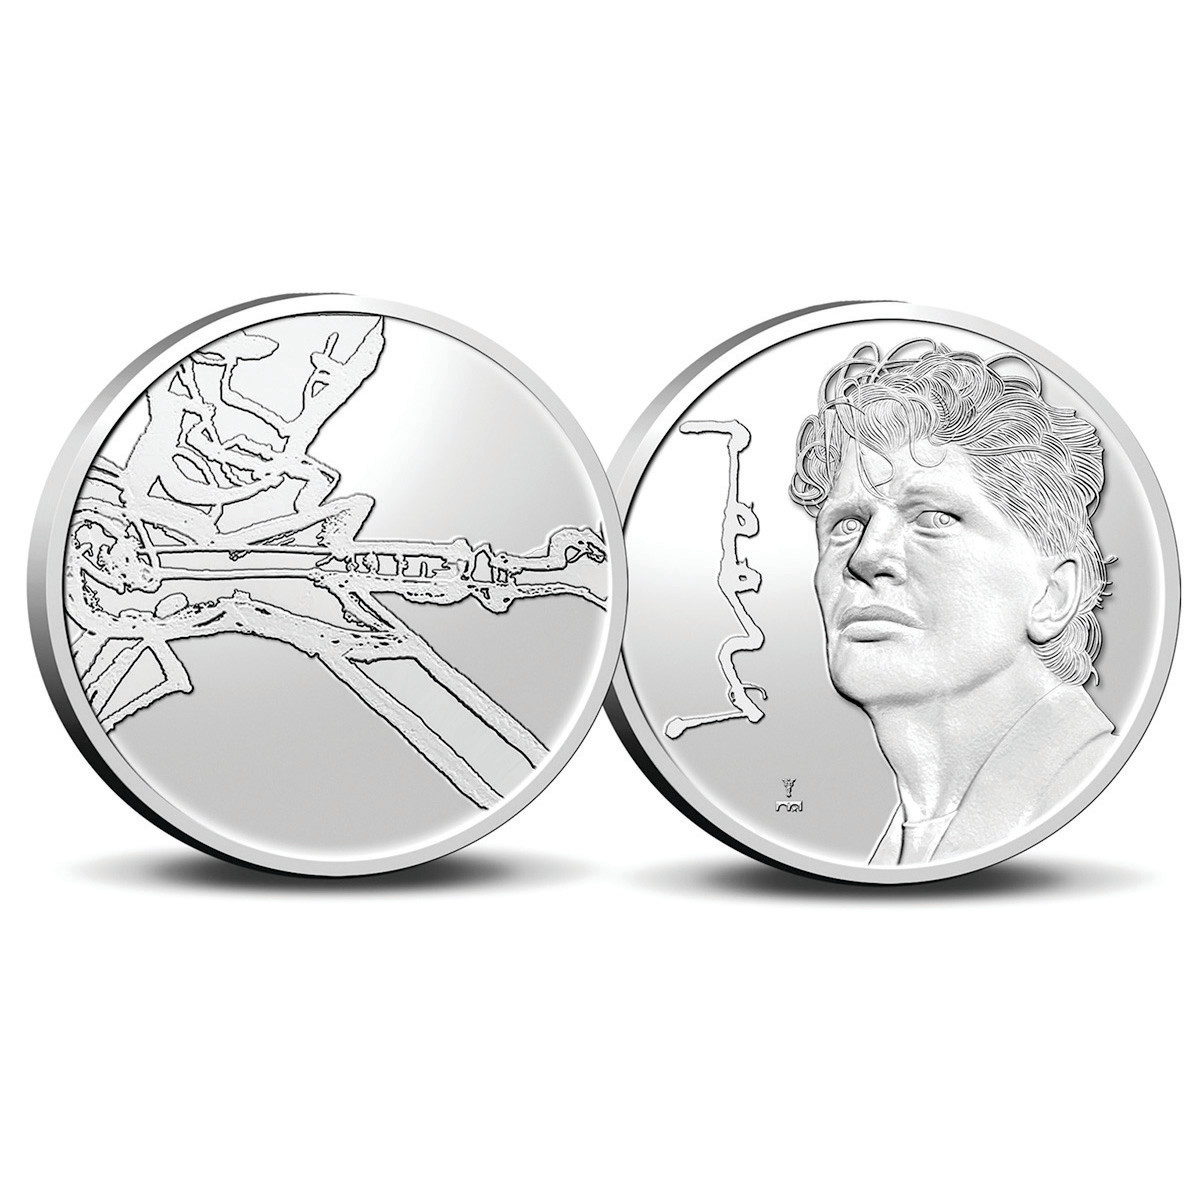 The copper-nickel commemorative medal features a great focus image of a guitarist, while the other side shows a bust of Herman Brood which is used on all three releases in the series.